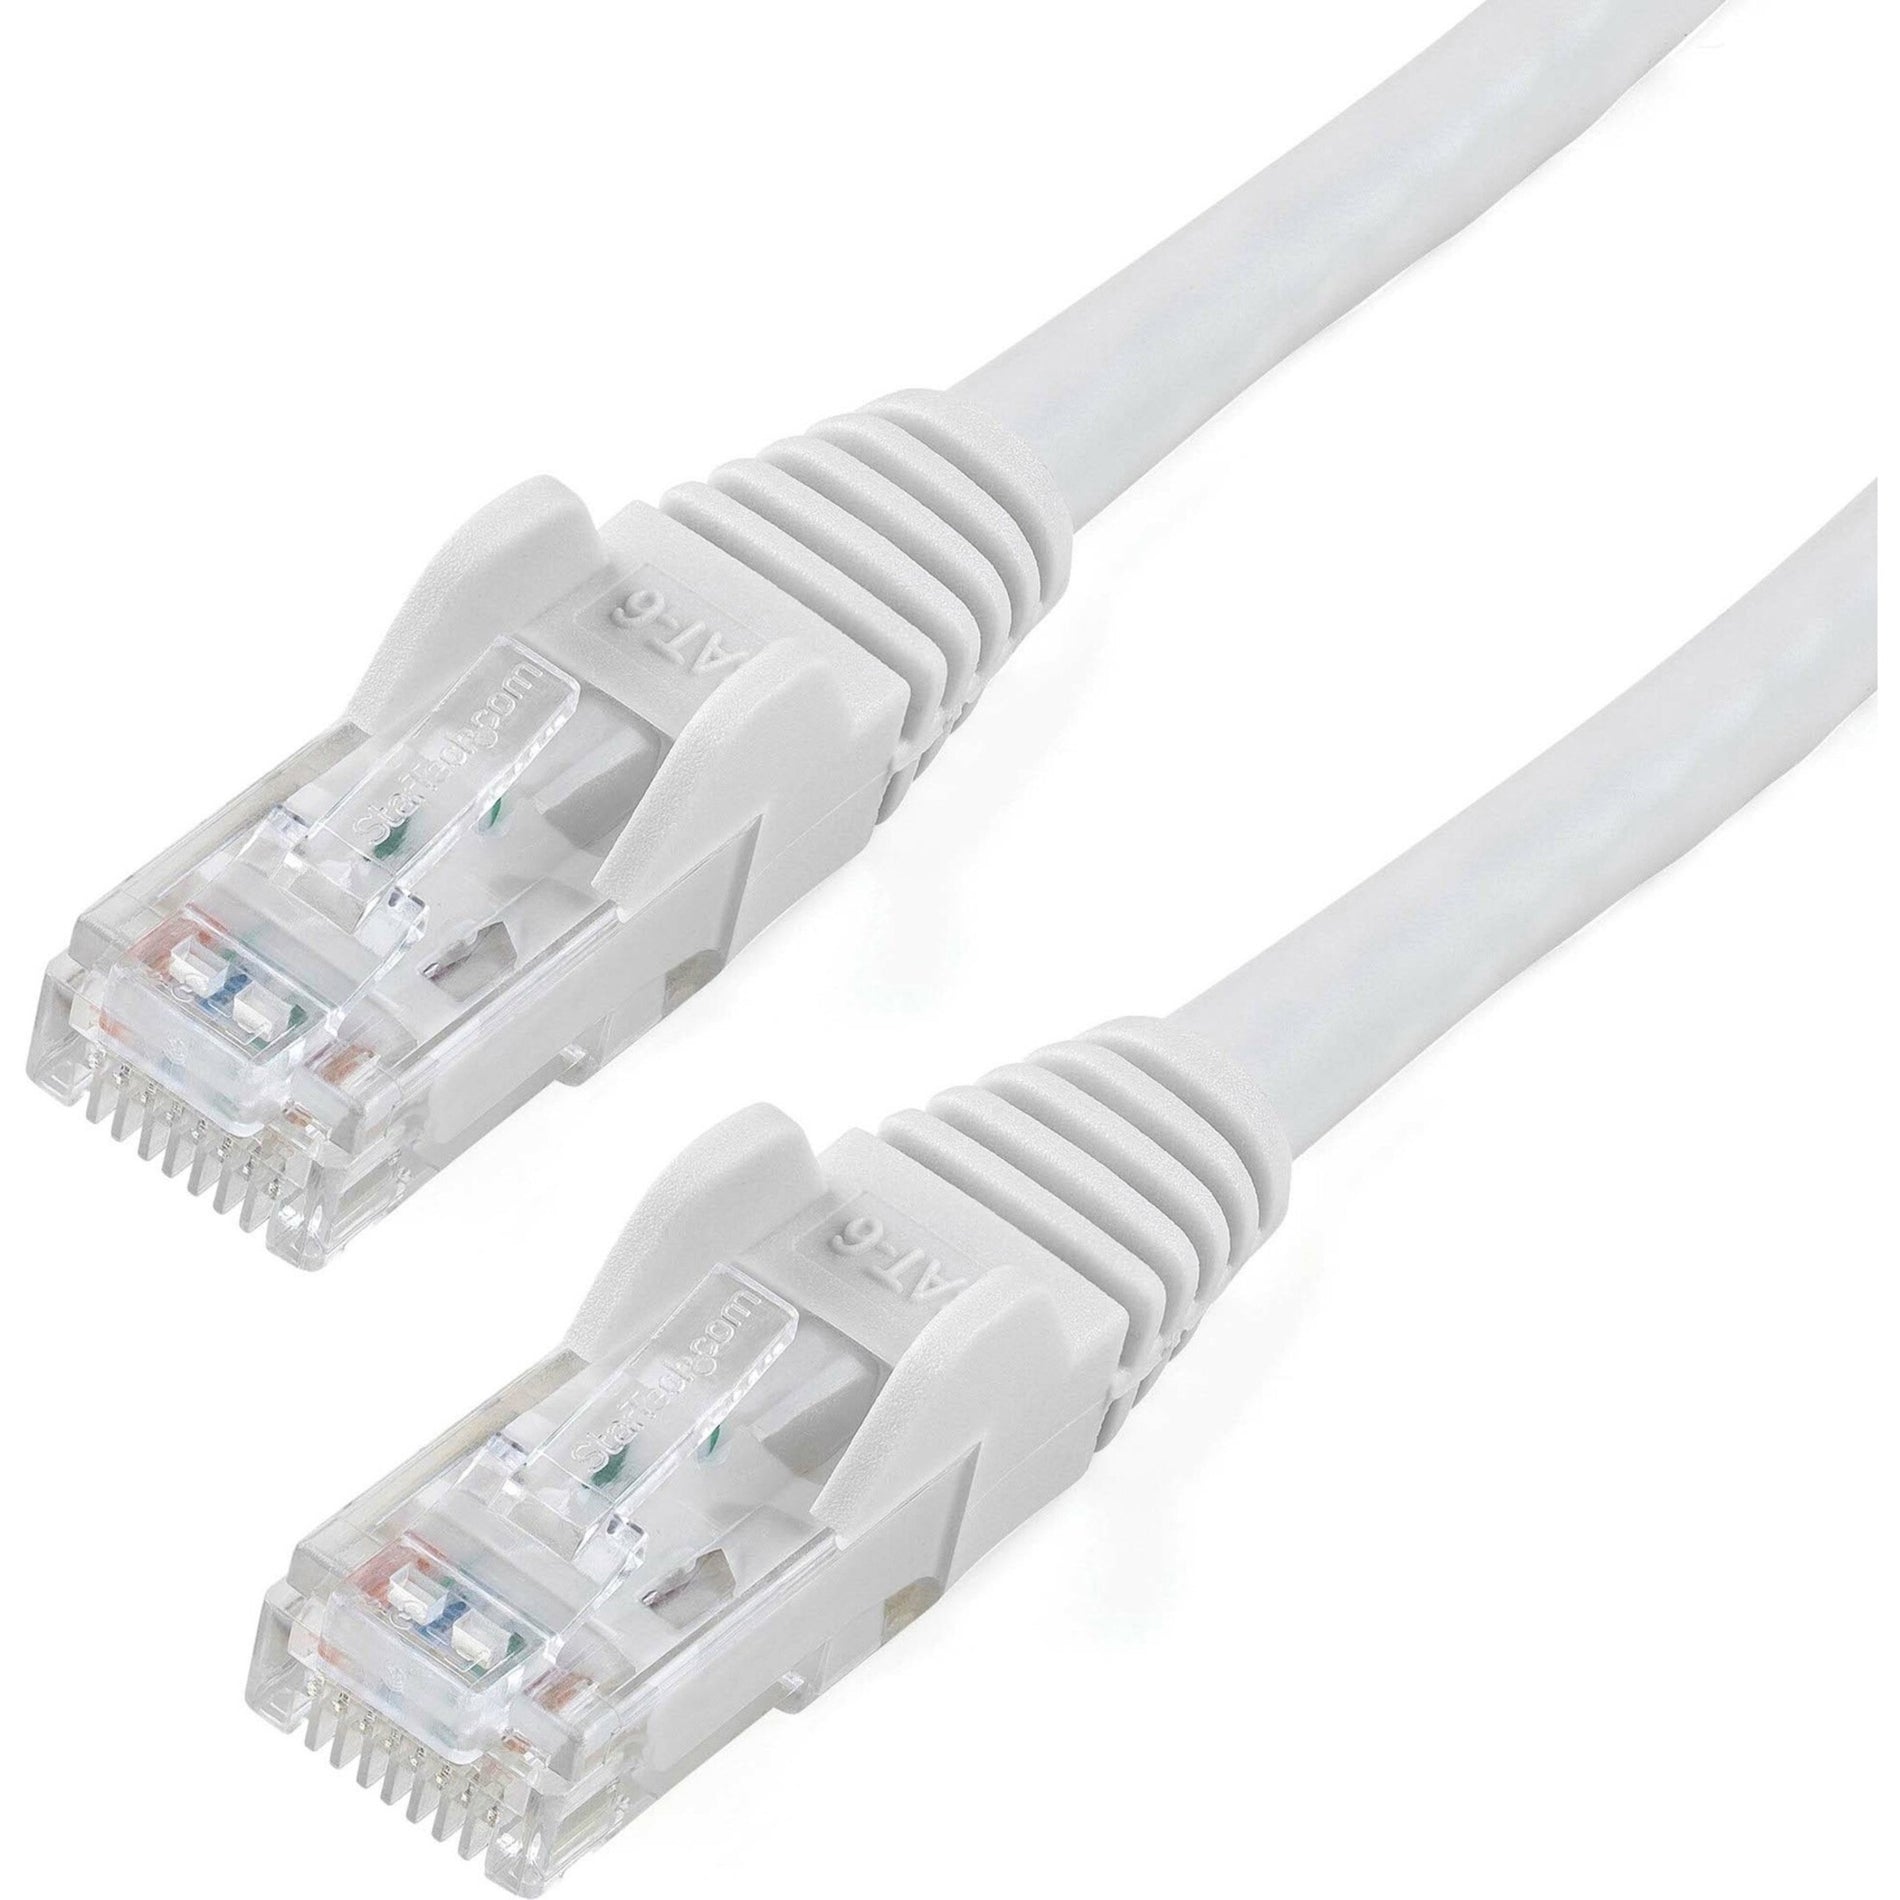 StarTech.com N6PATCH6WH Cat6 Patch Cable, 6 ft White Ethernet Cable, Snagless RJ45 Connectors